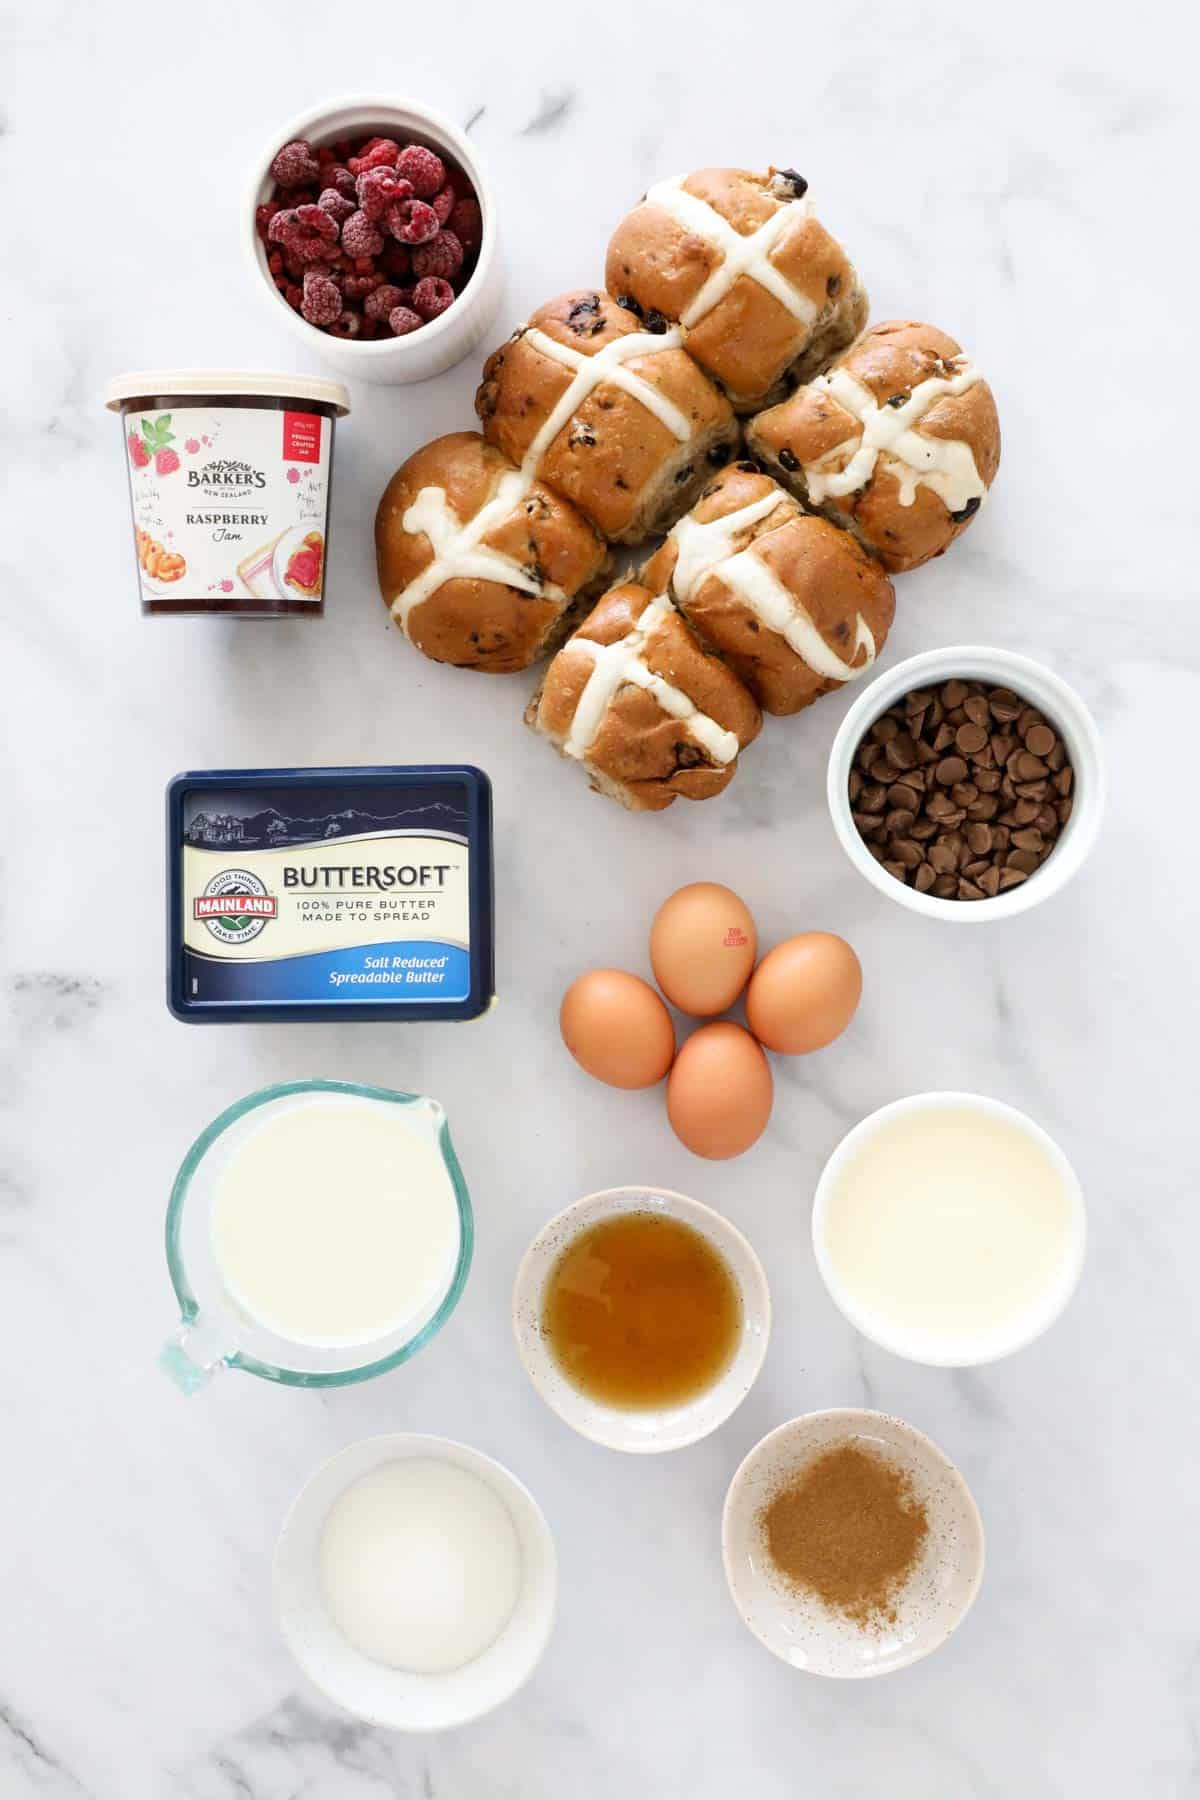 The ingredients for bread and butter pudding made with hot cross buns.